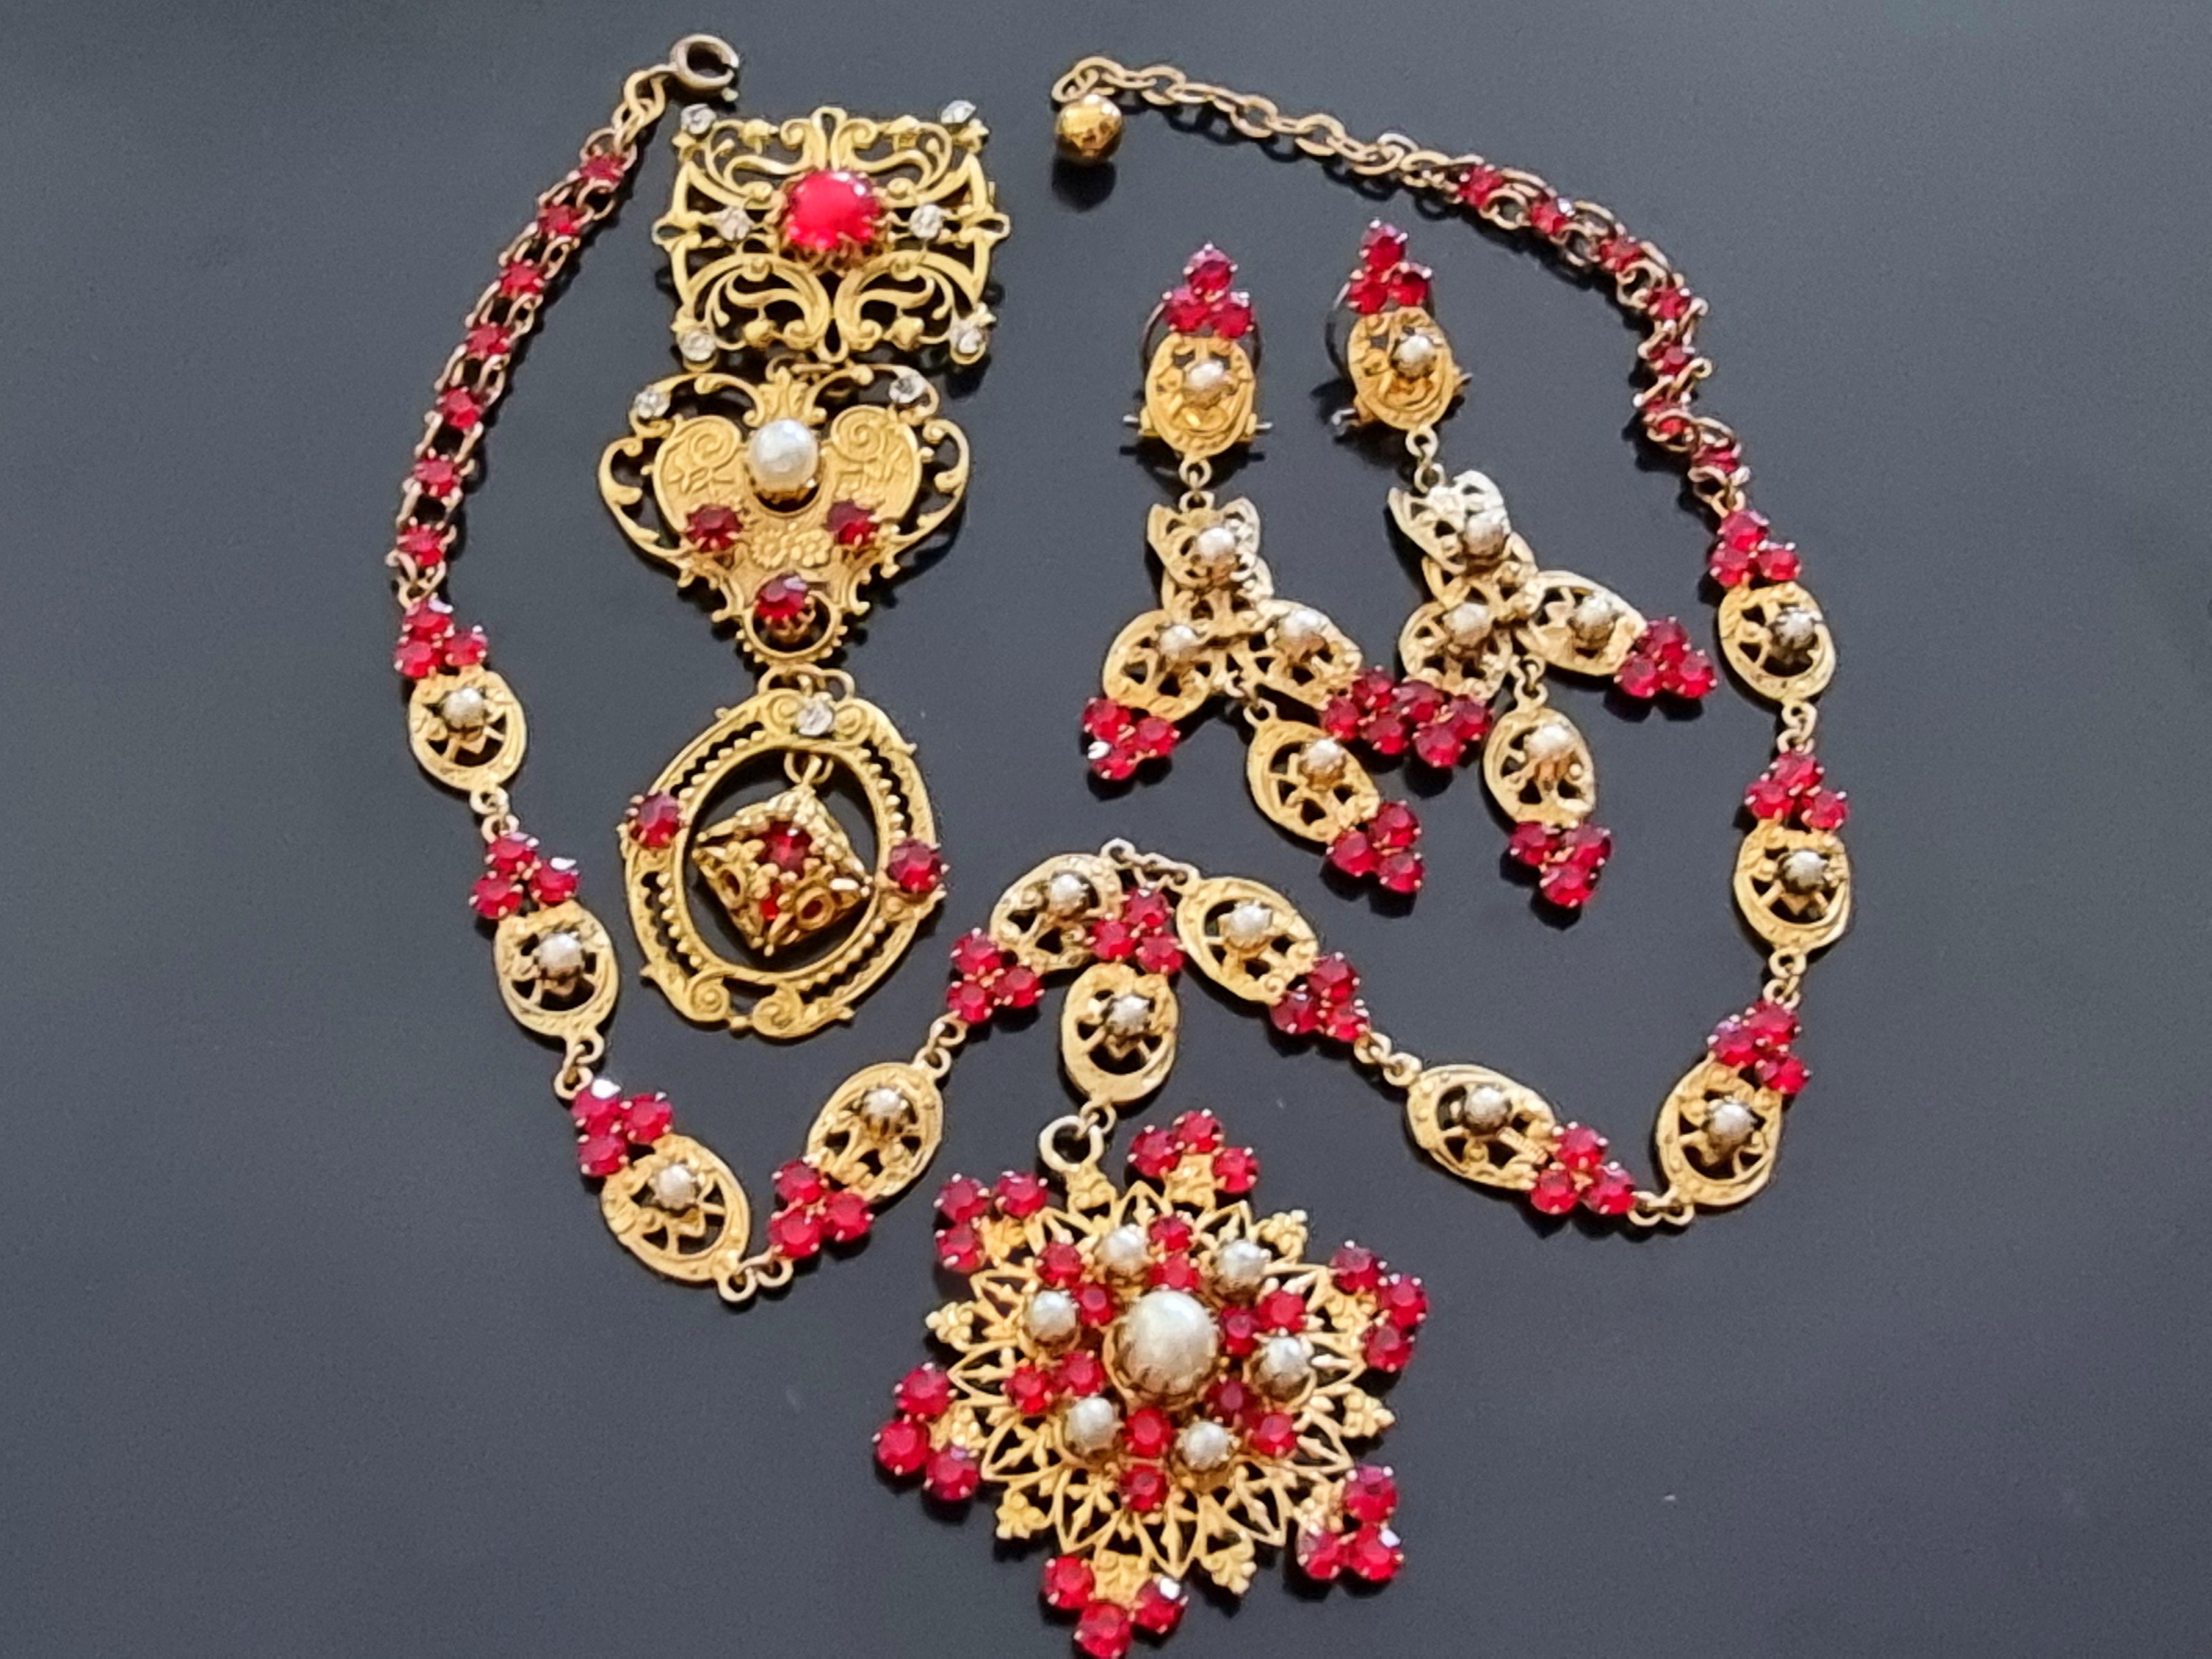 Magnificent old PARURE:
BROOCH NECKLACE and EARRINGS with Clips,
100% High Fashion, exceptional workmanship, extraordinary quality,
vintage 40s - 50s,
French haute couture designer to be identified,
gold metal, pearls, rhinestones, glass